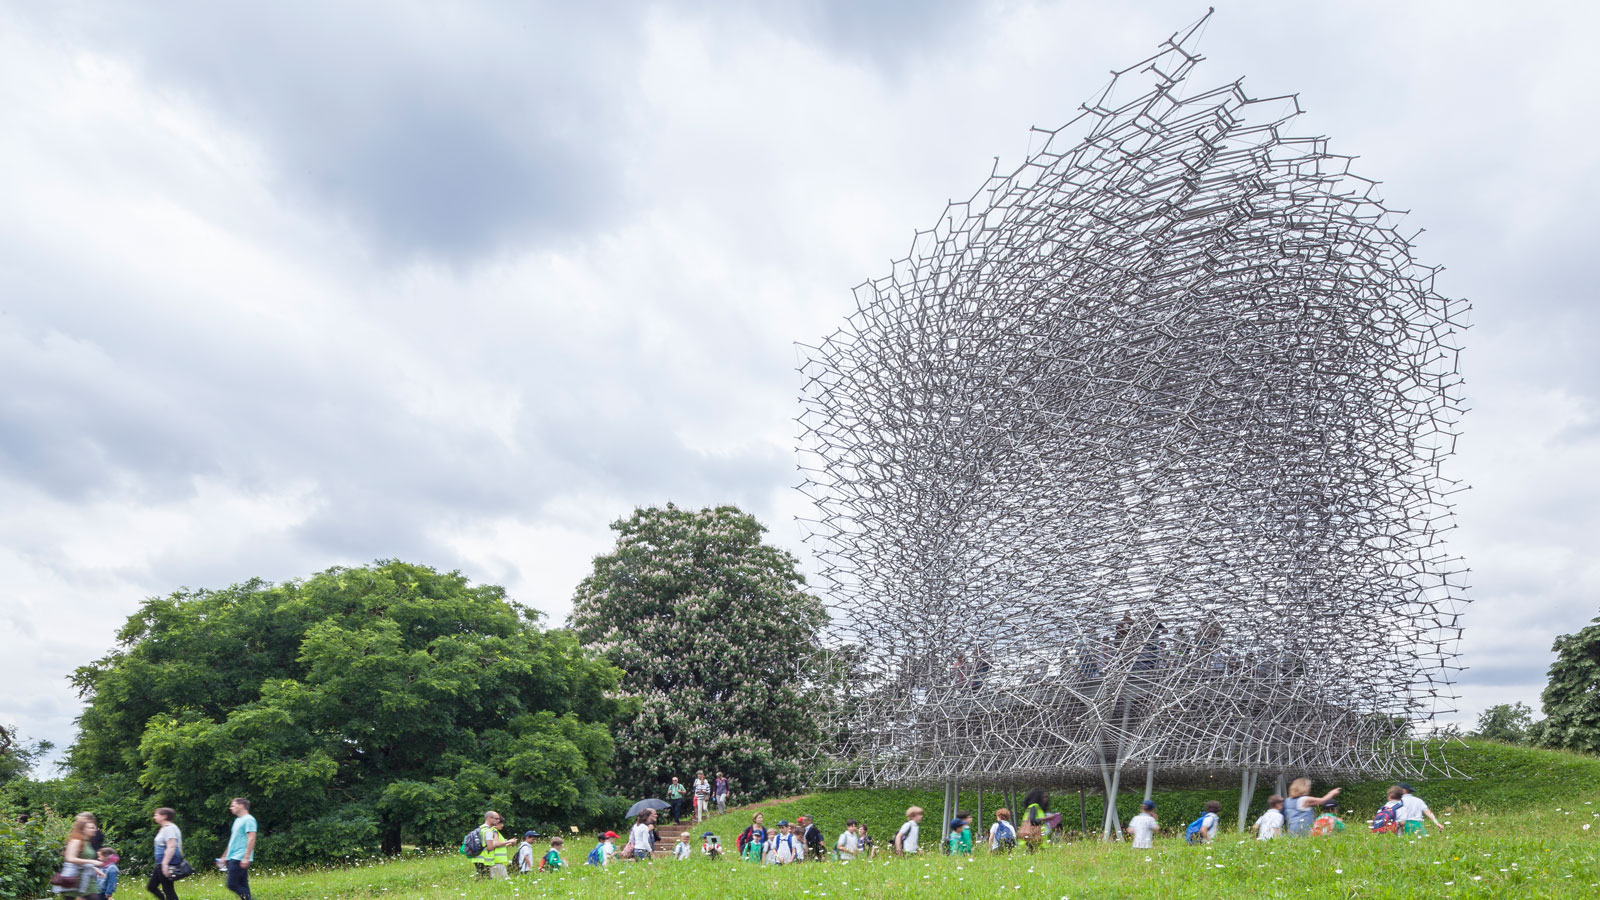 /globalassets/projects/the-hive-royal-botanic-gardens/hivepeople.jpg